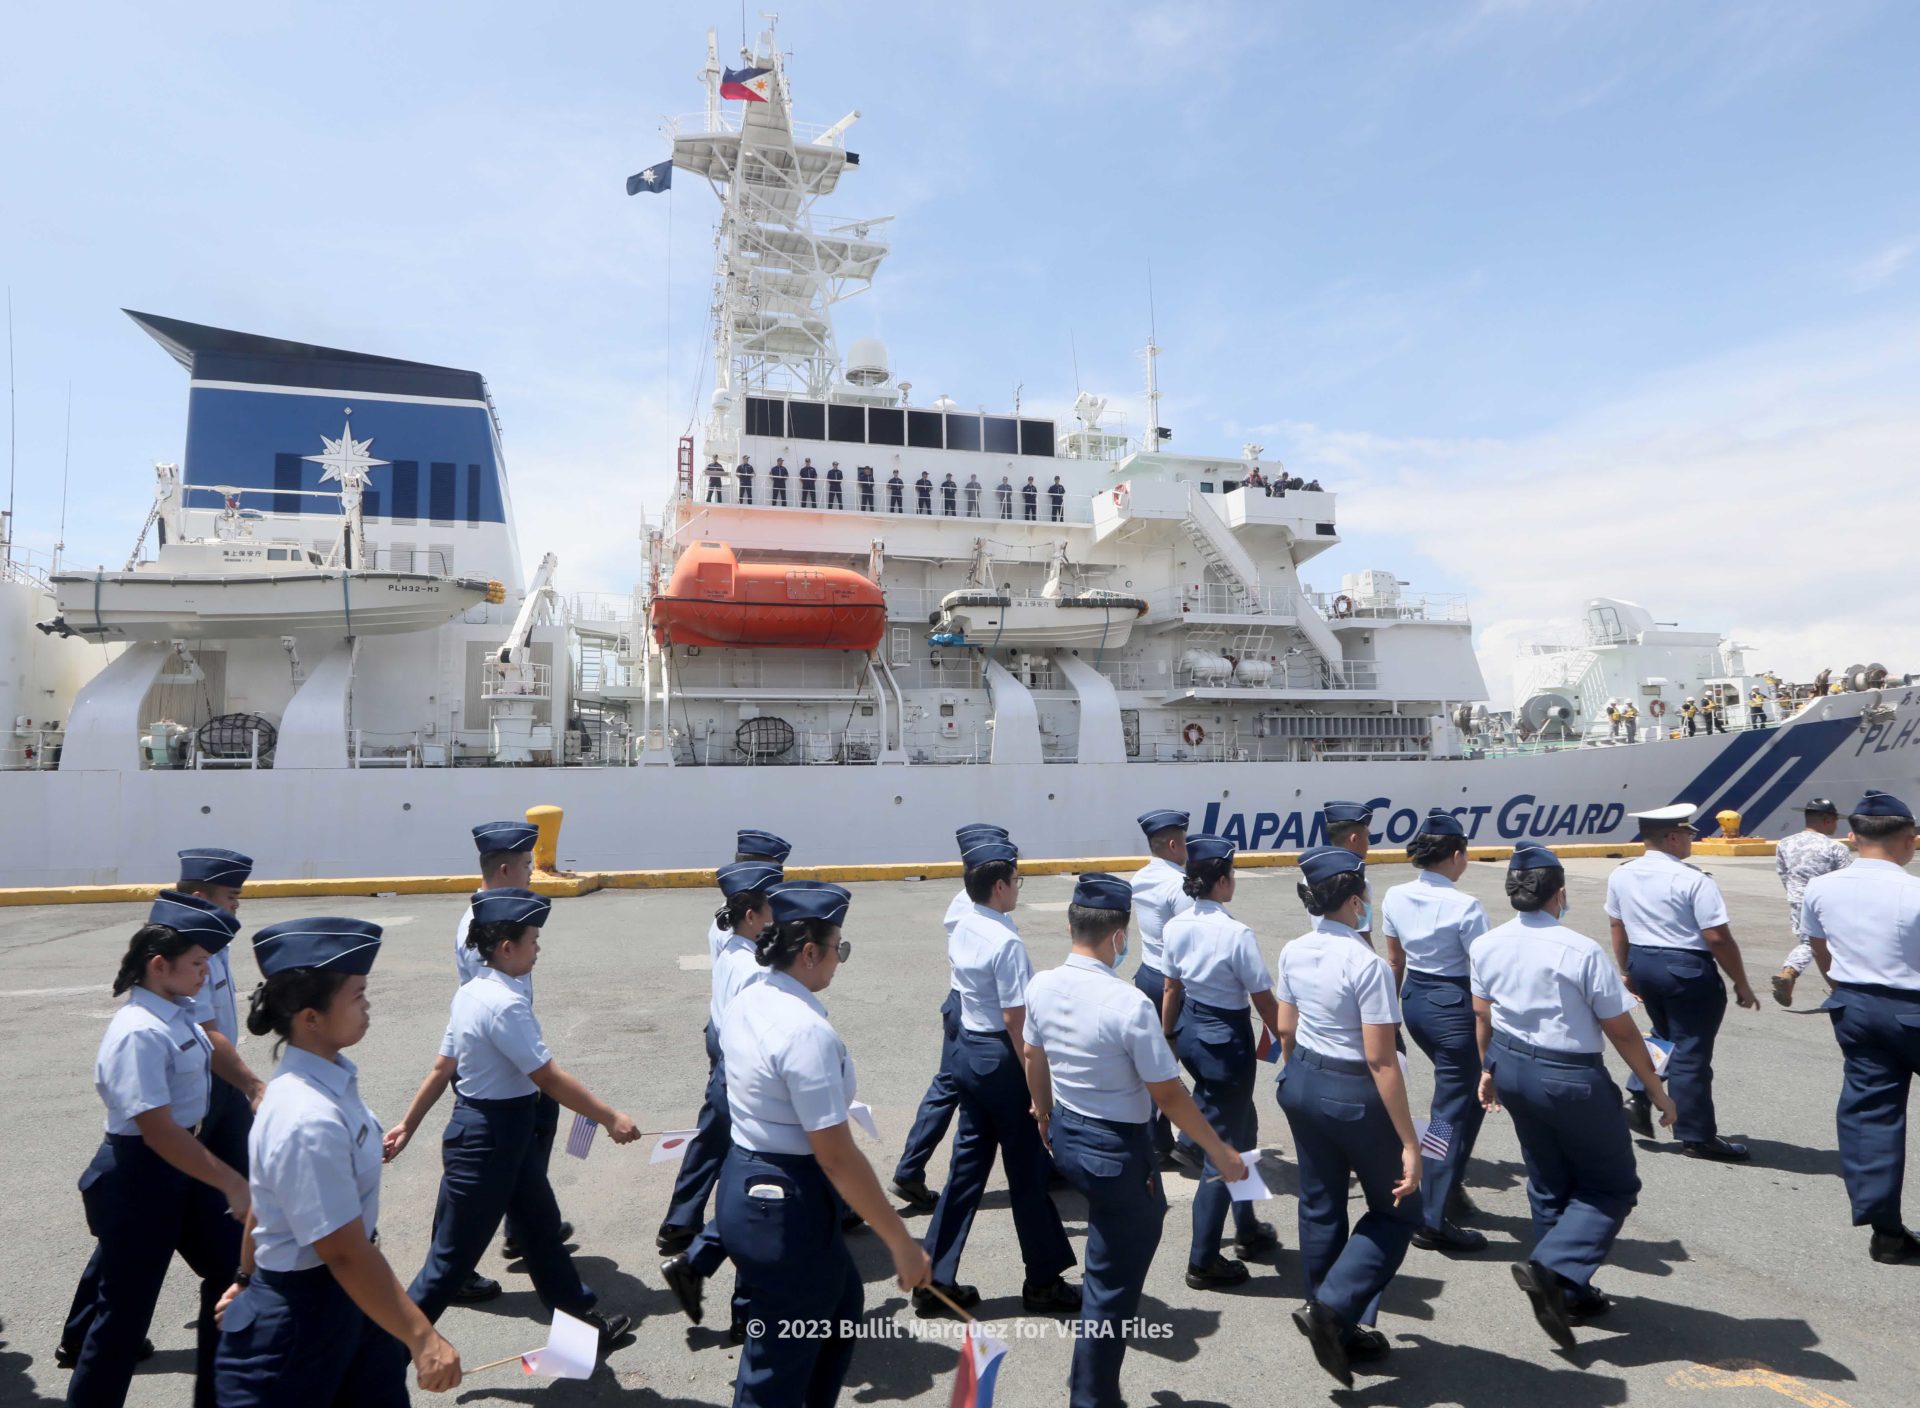 060123 Japan US Coast Guard in PH 5/11 Photo by Bullit Marquez